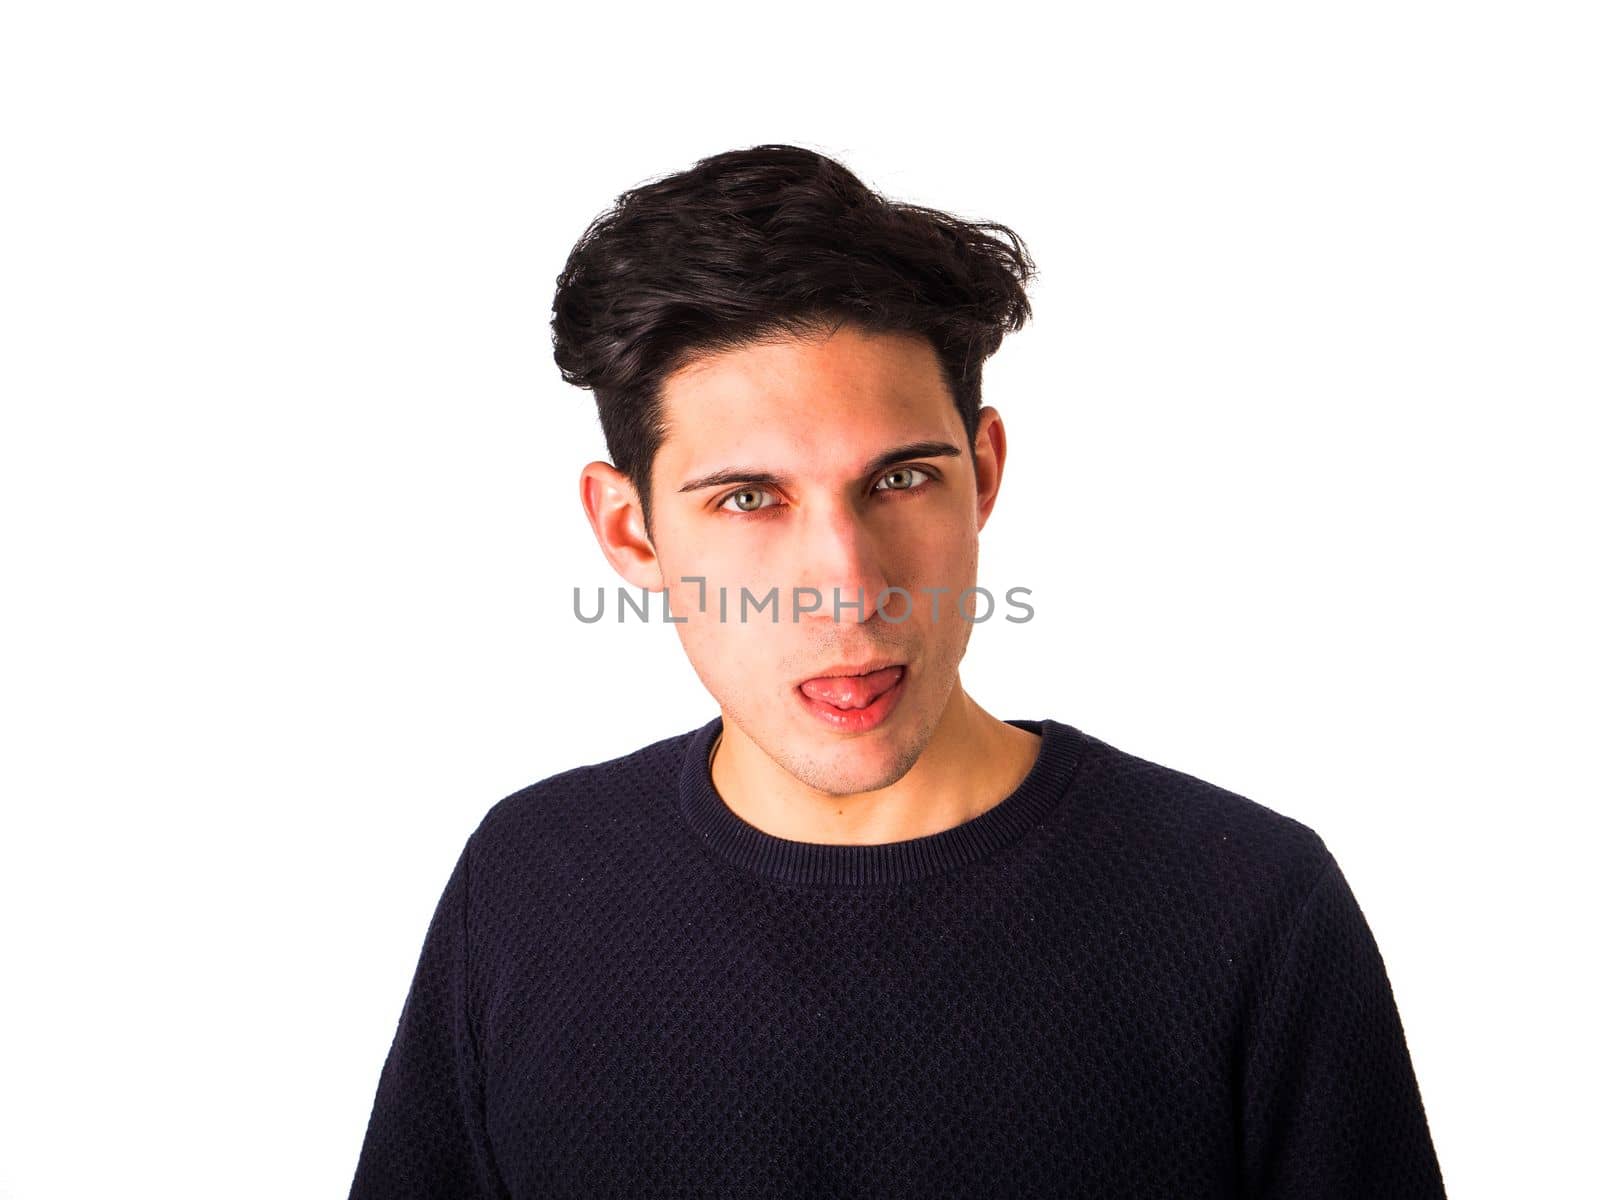 Attractive young man doing fun expression sticking out tongue by artofphoto